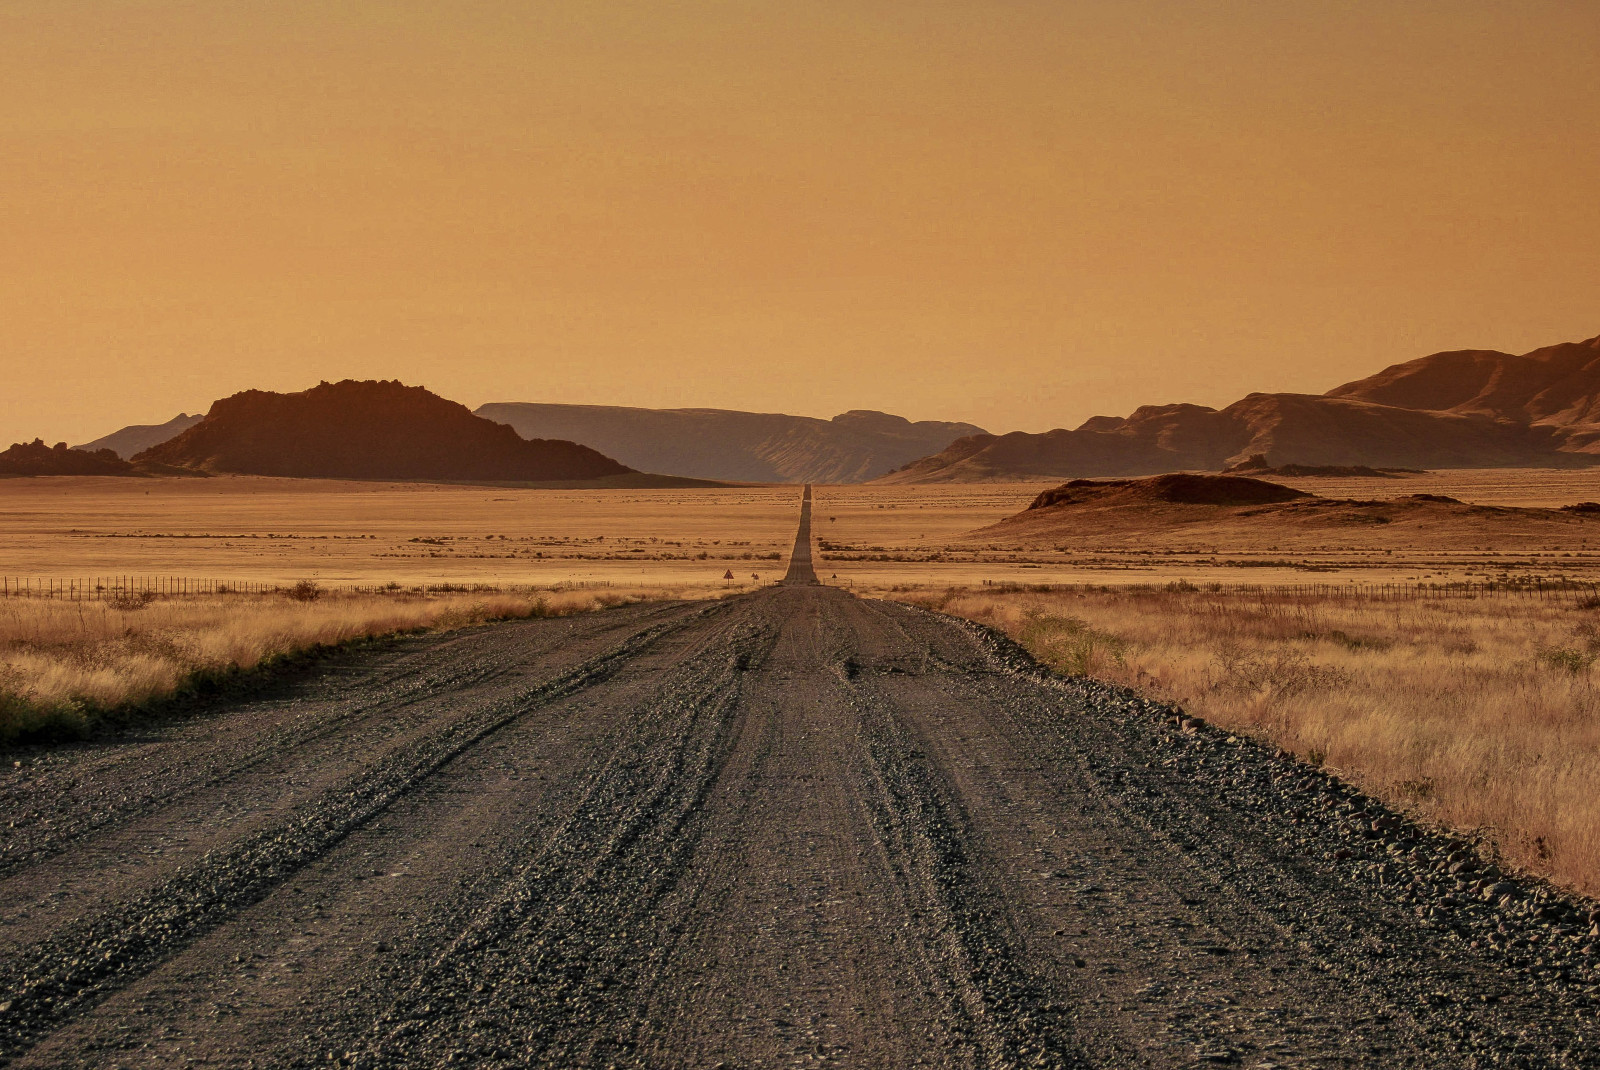 Long dirt road in Namibia, Africa